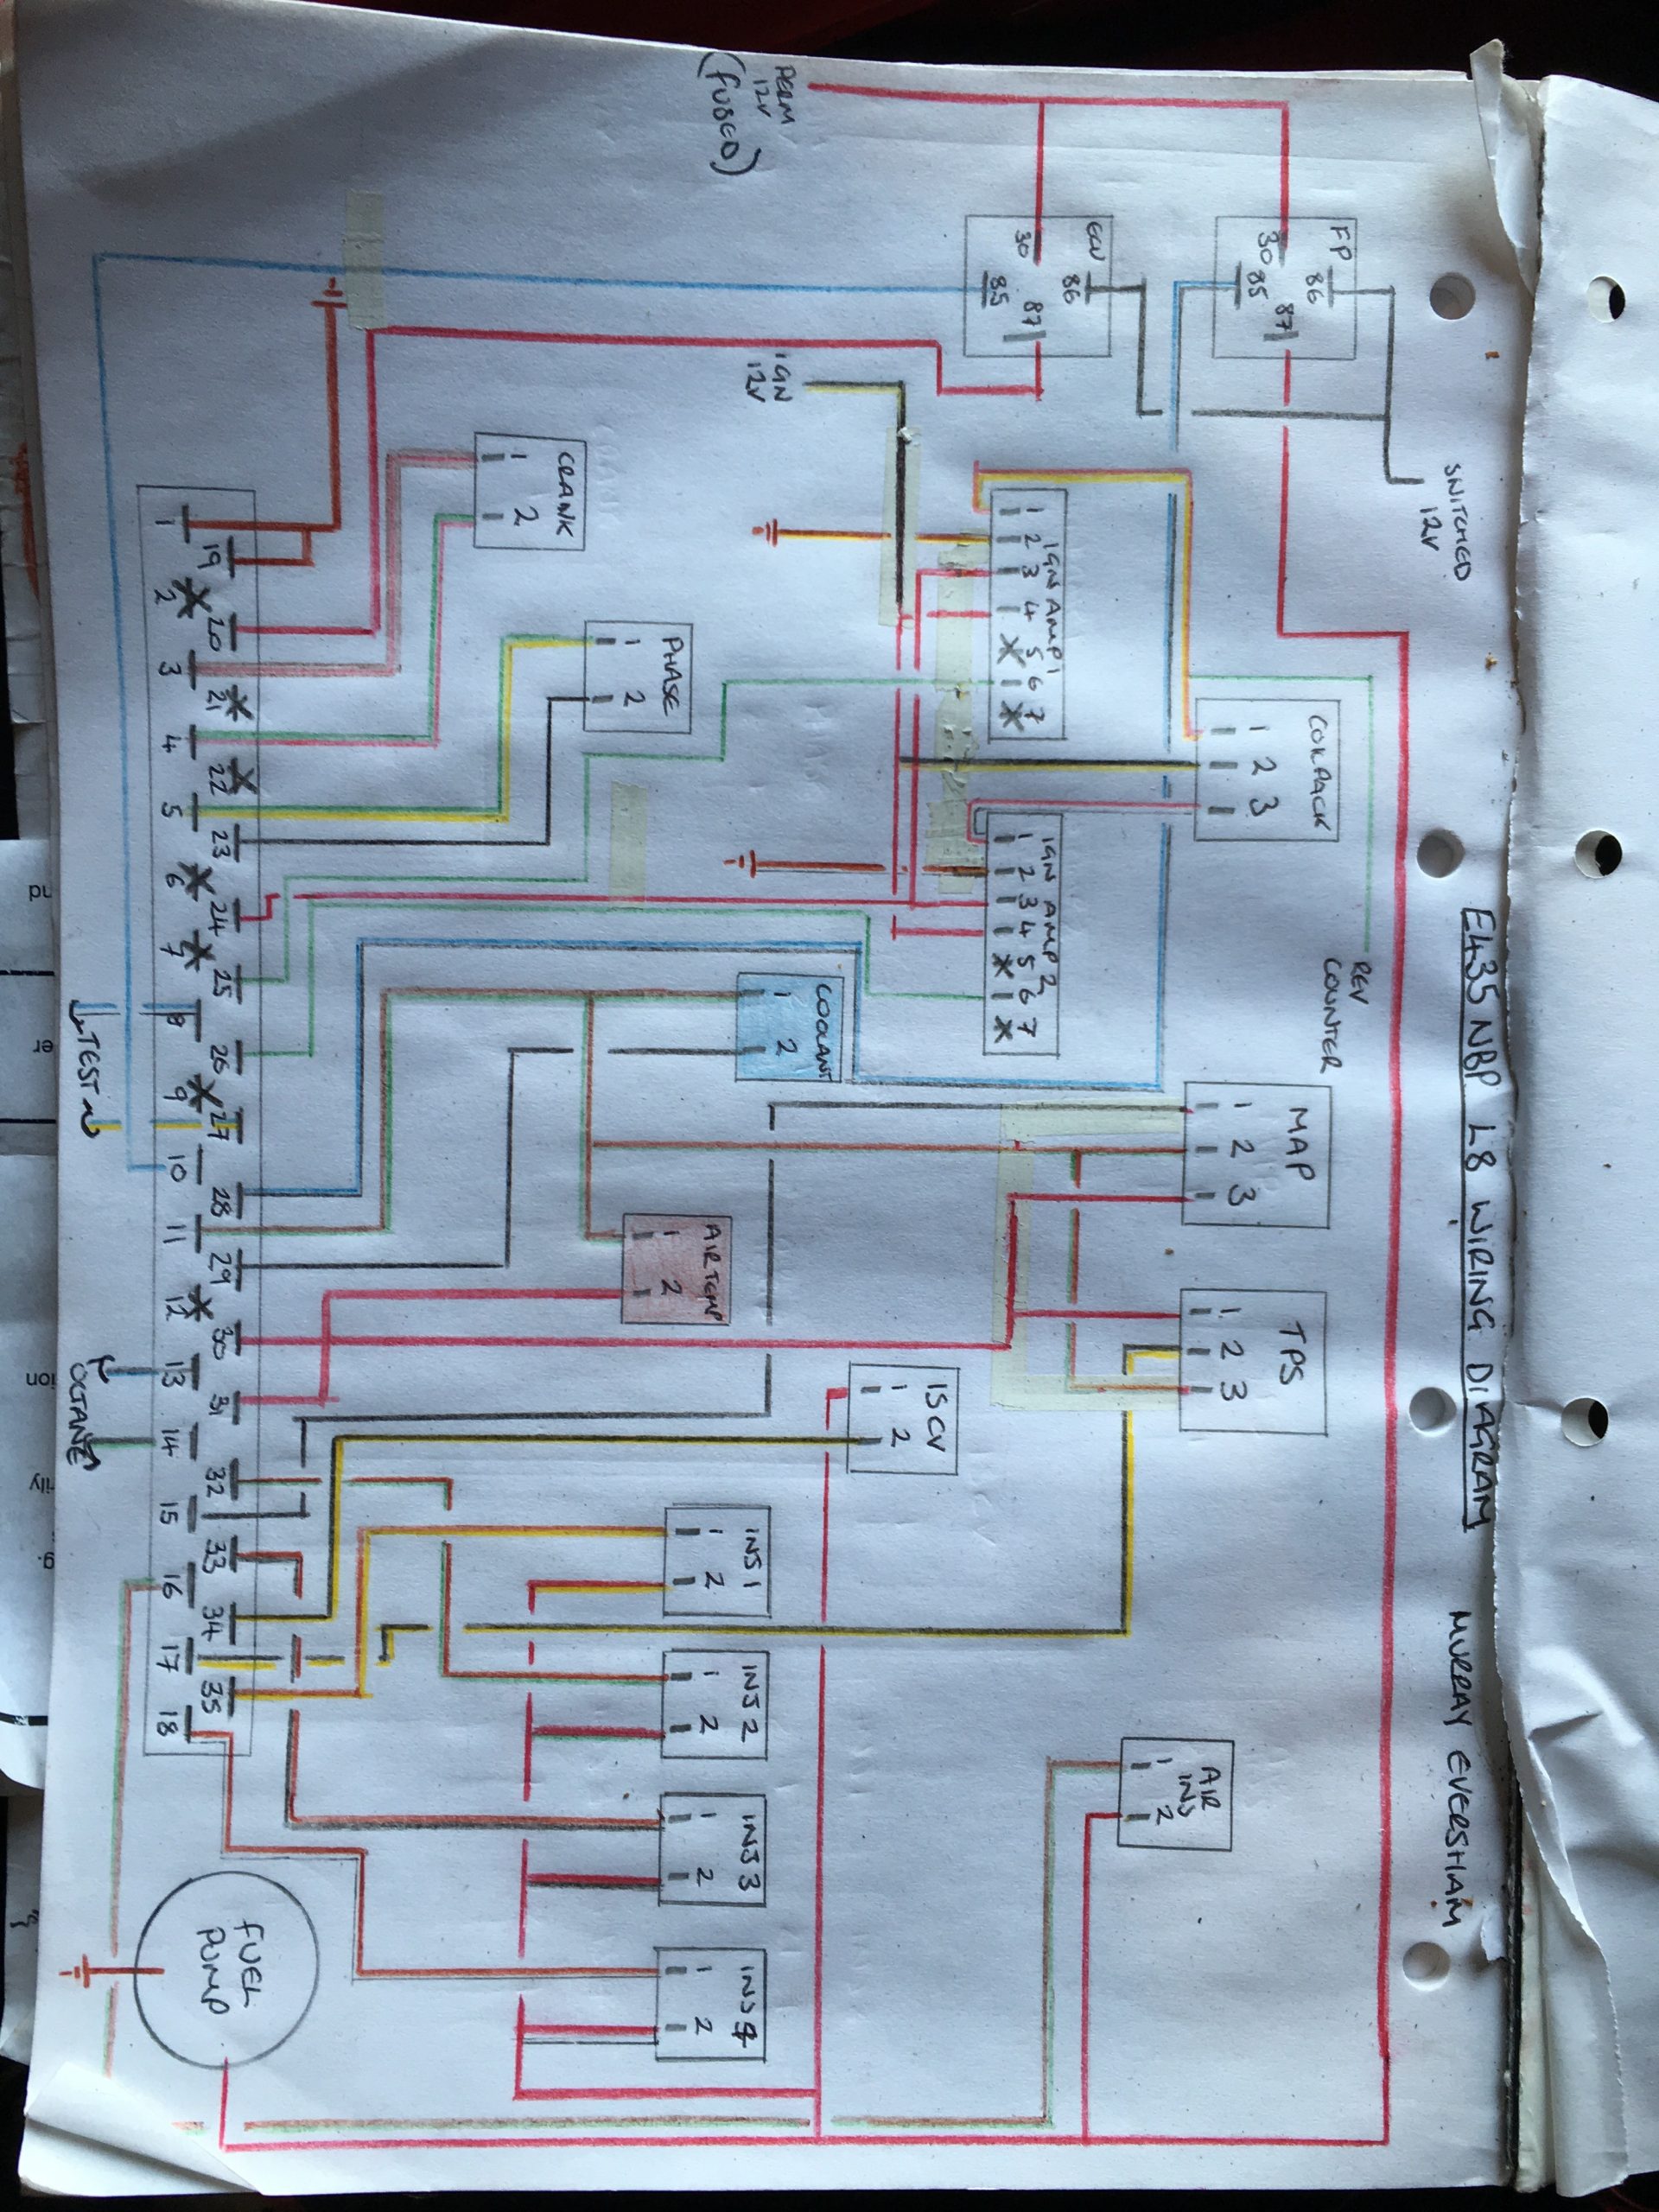 does this wiring diagram look correctml